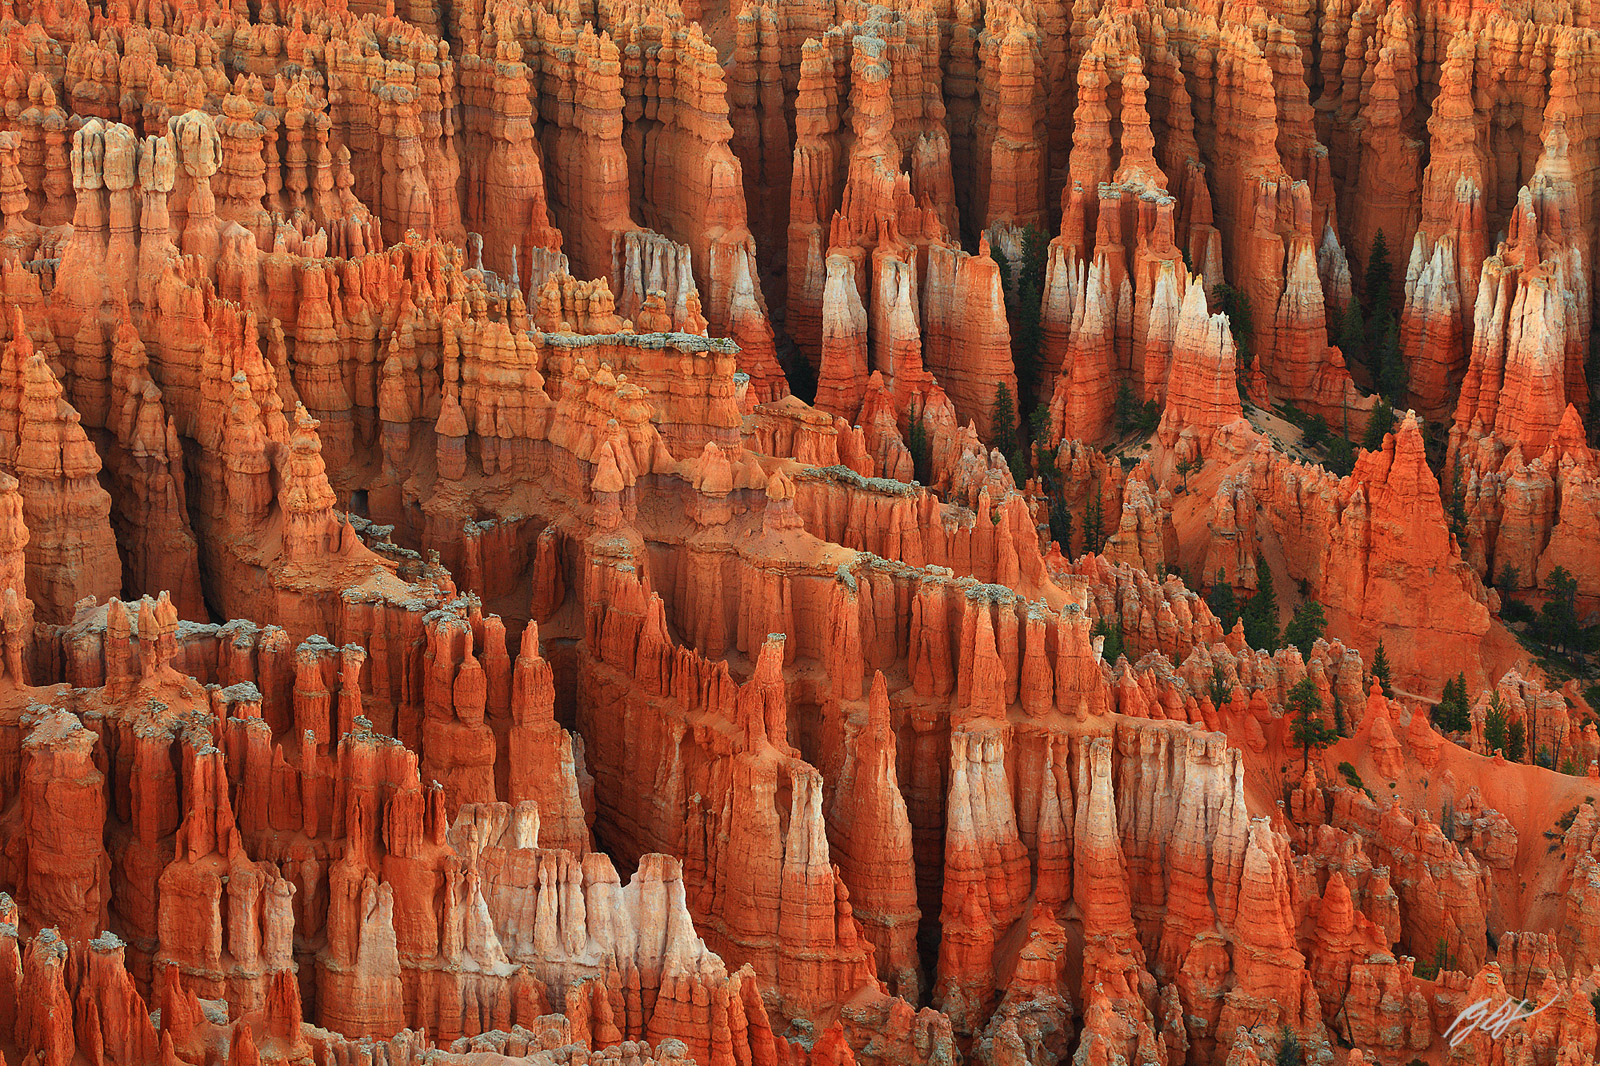 Hoodoo Formations from Inspiration point in Bryce Canyon National Park in Utah